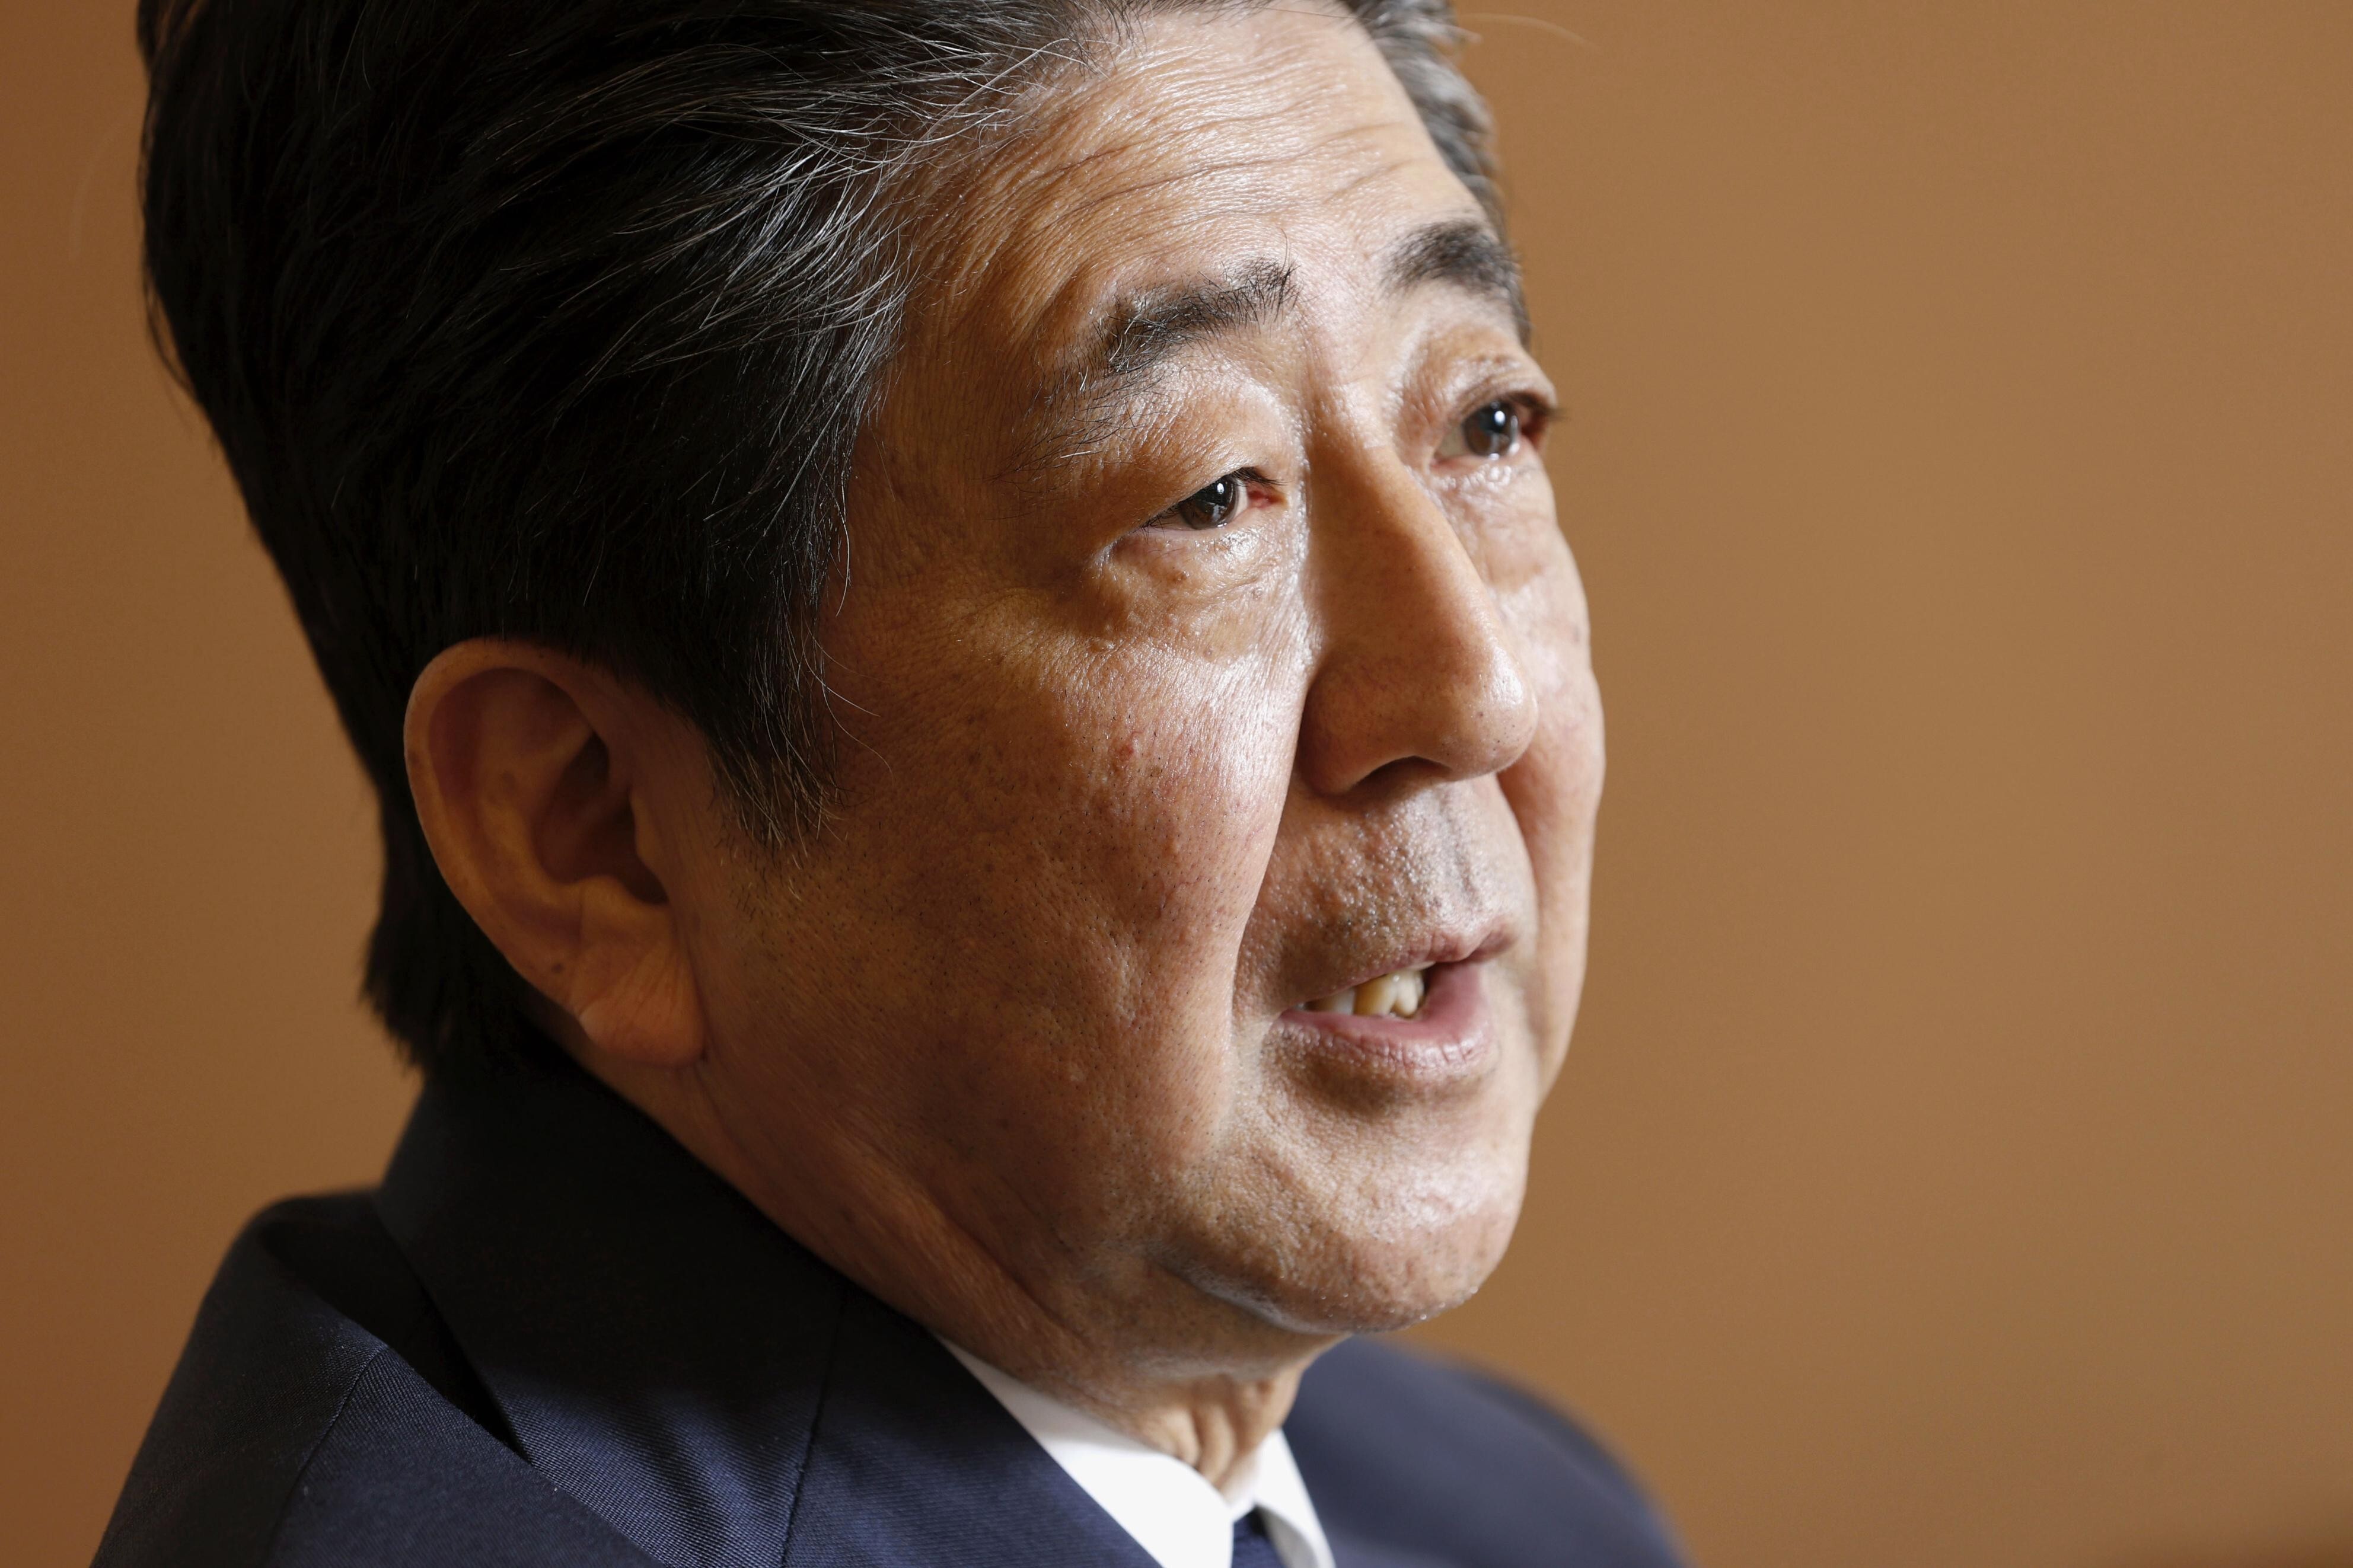 Former Japanese Prime Minister Shinzo Abe speaks during an interview in Tokyo earlier this month. Photo: Kyodo